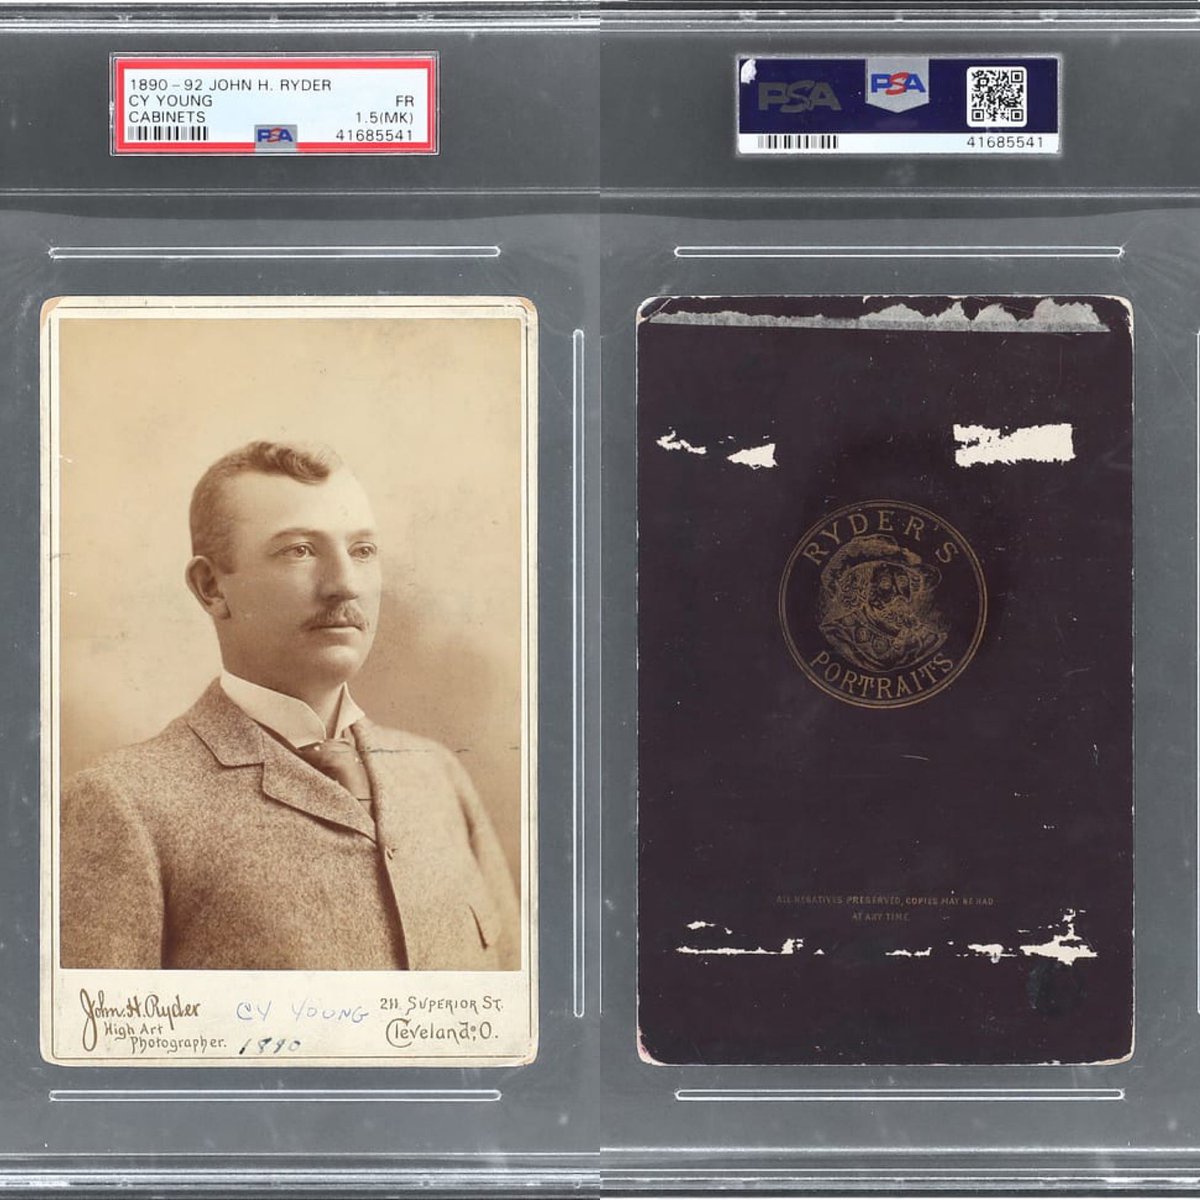 This is the only Cy Young rookie card in existence, currently at $305,000 (w/buyer’s premium) @GoldinCo with over a month left of bidding. I think this surpasses the Wagner card at some point…